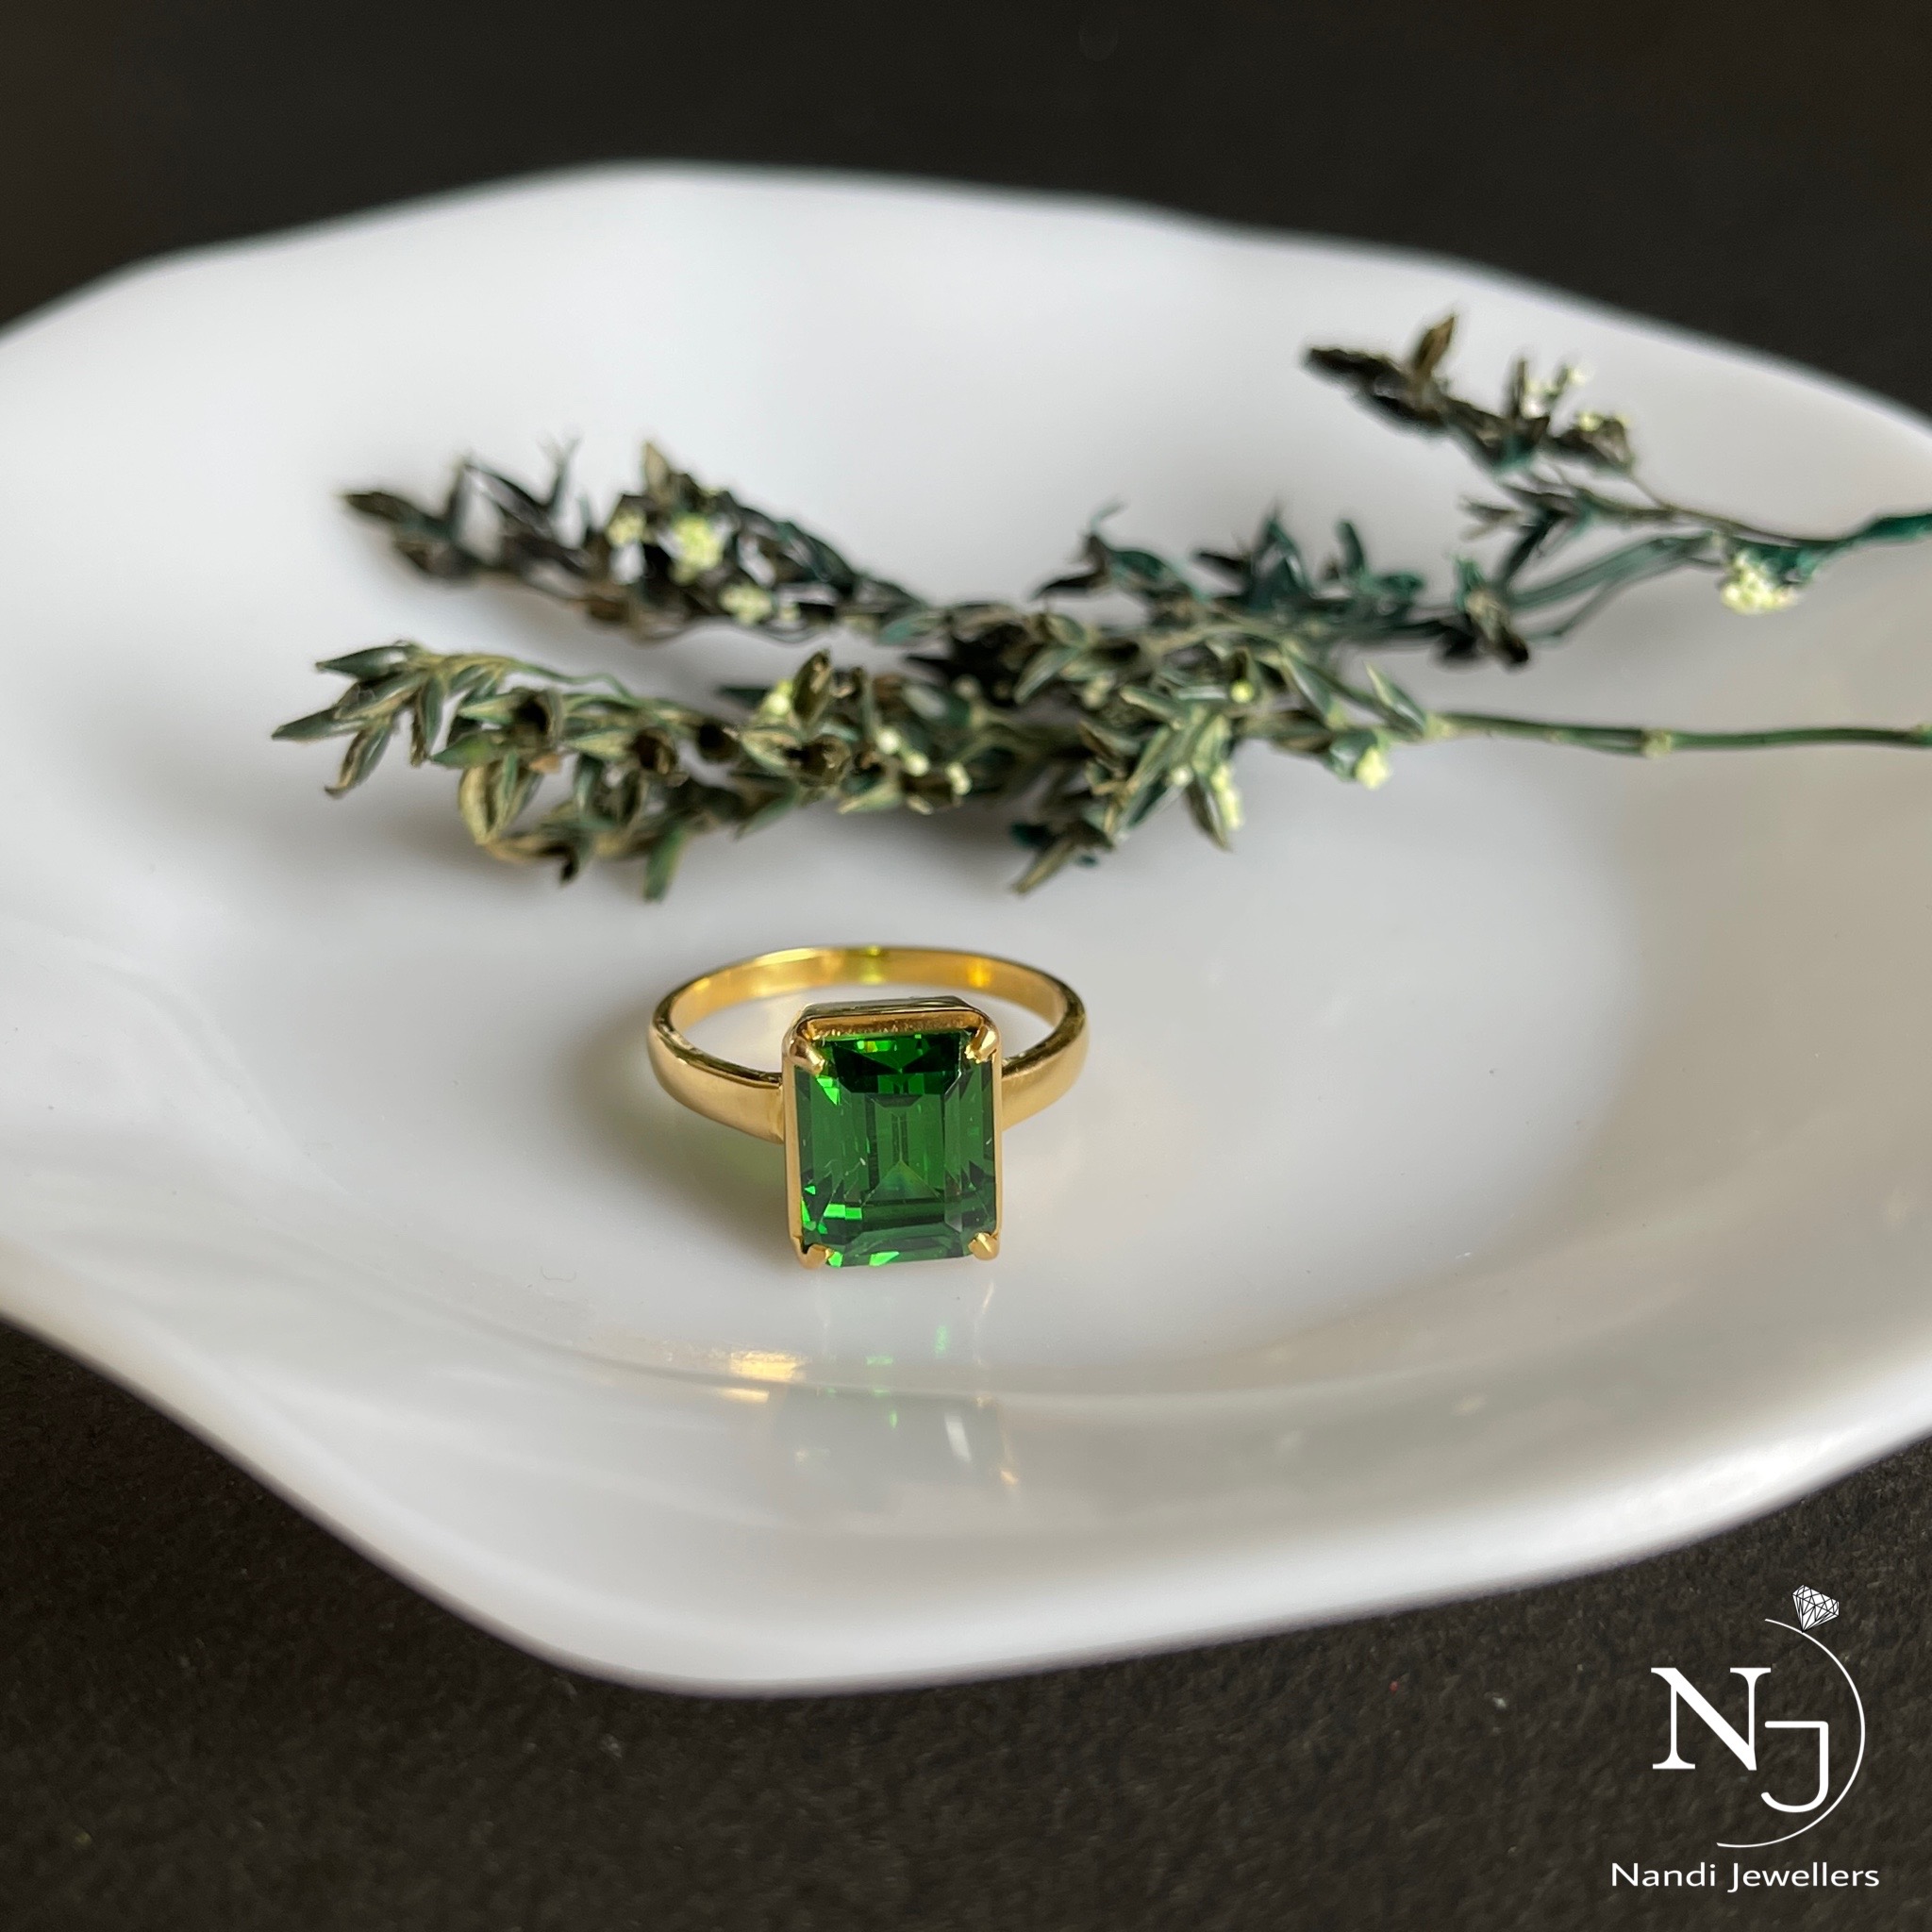 Green Stone | Gold ring designs, Gold rings fashion, Gold jewelry fashion